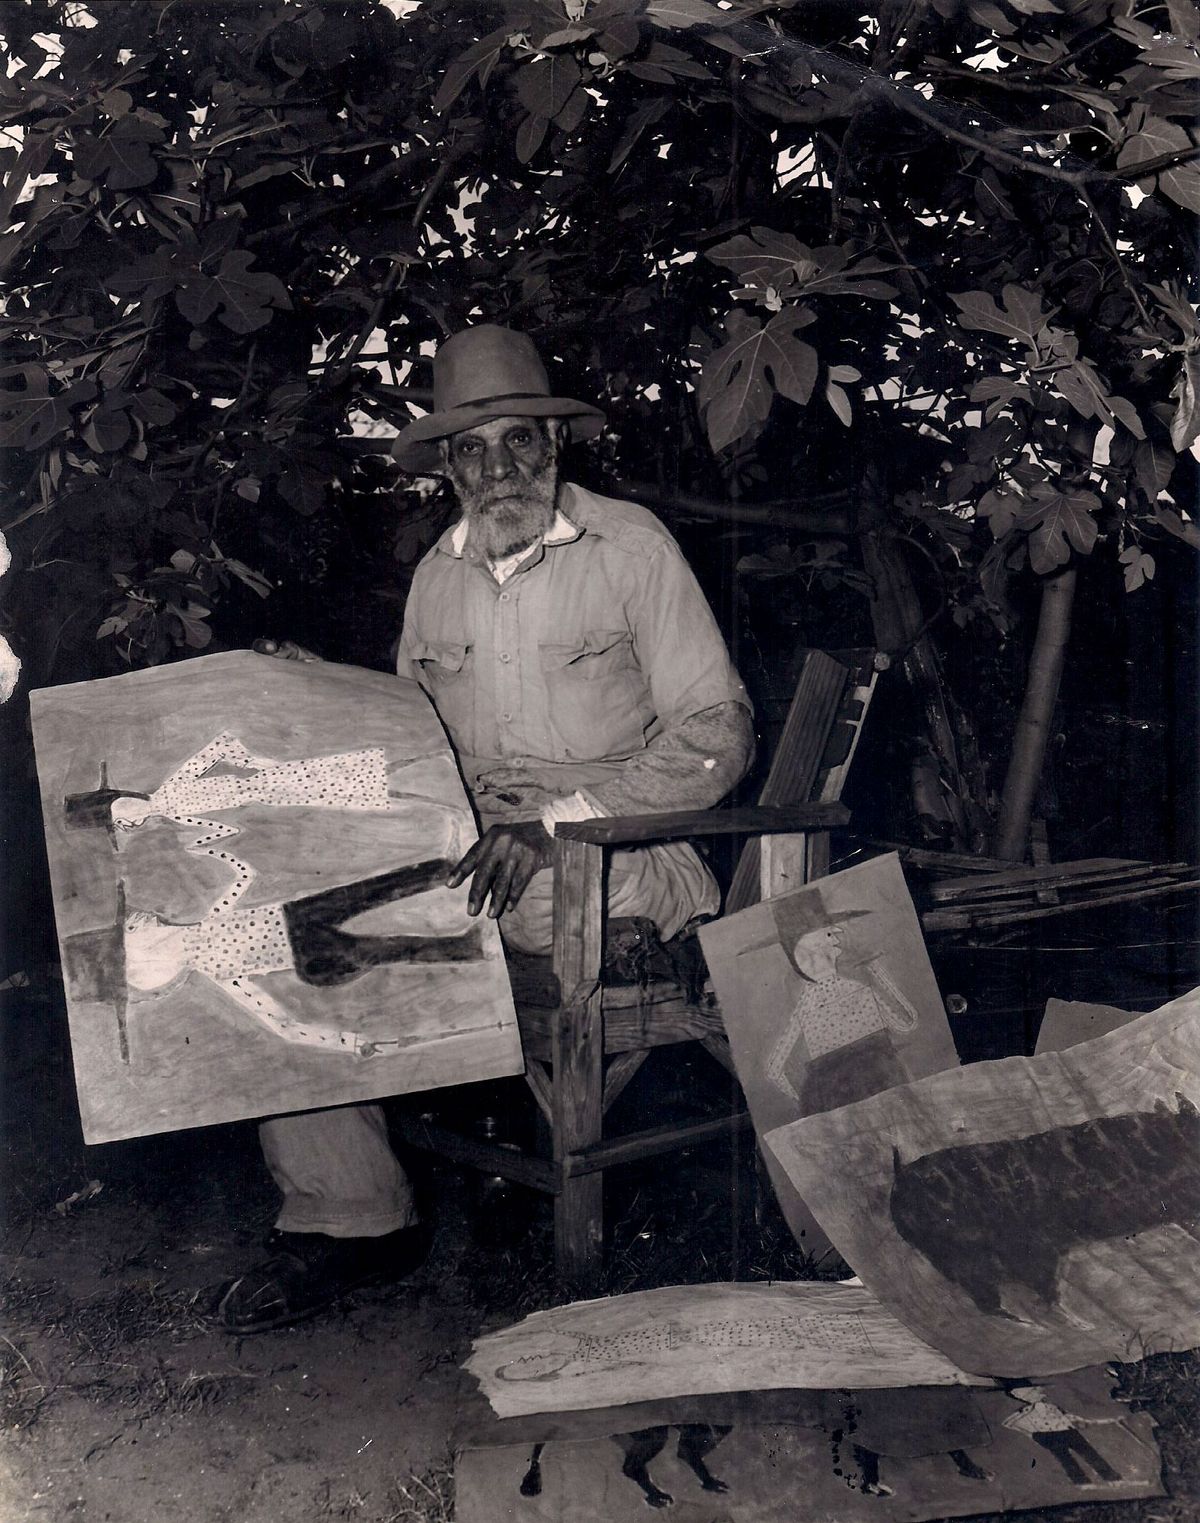 Bill Traylor started drawing in his 80s, after a lifetime working on the farms his family lived on since slavery Photo: Albert Kraus. Collection Tommy Giles Photographic Service